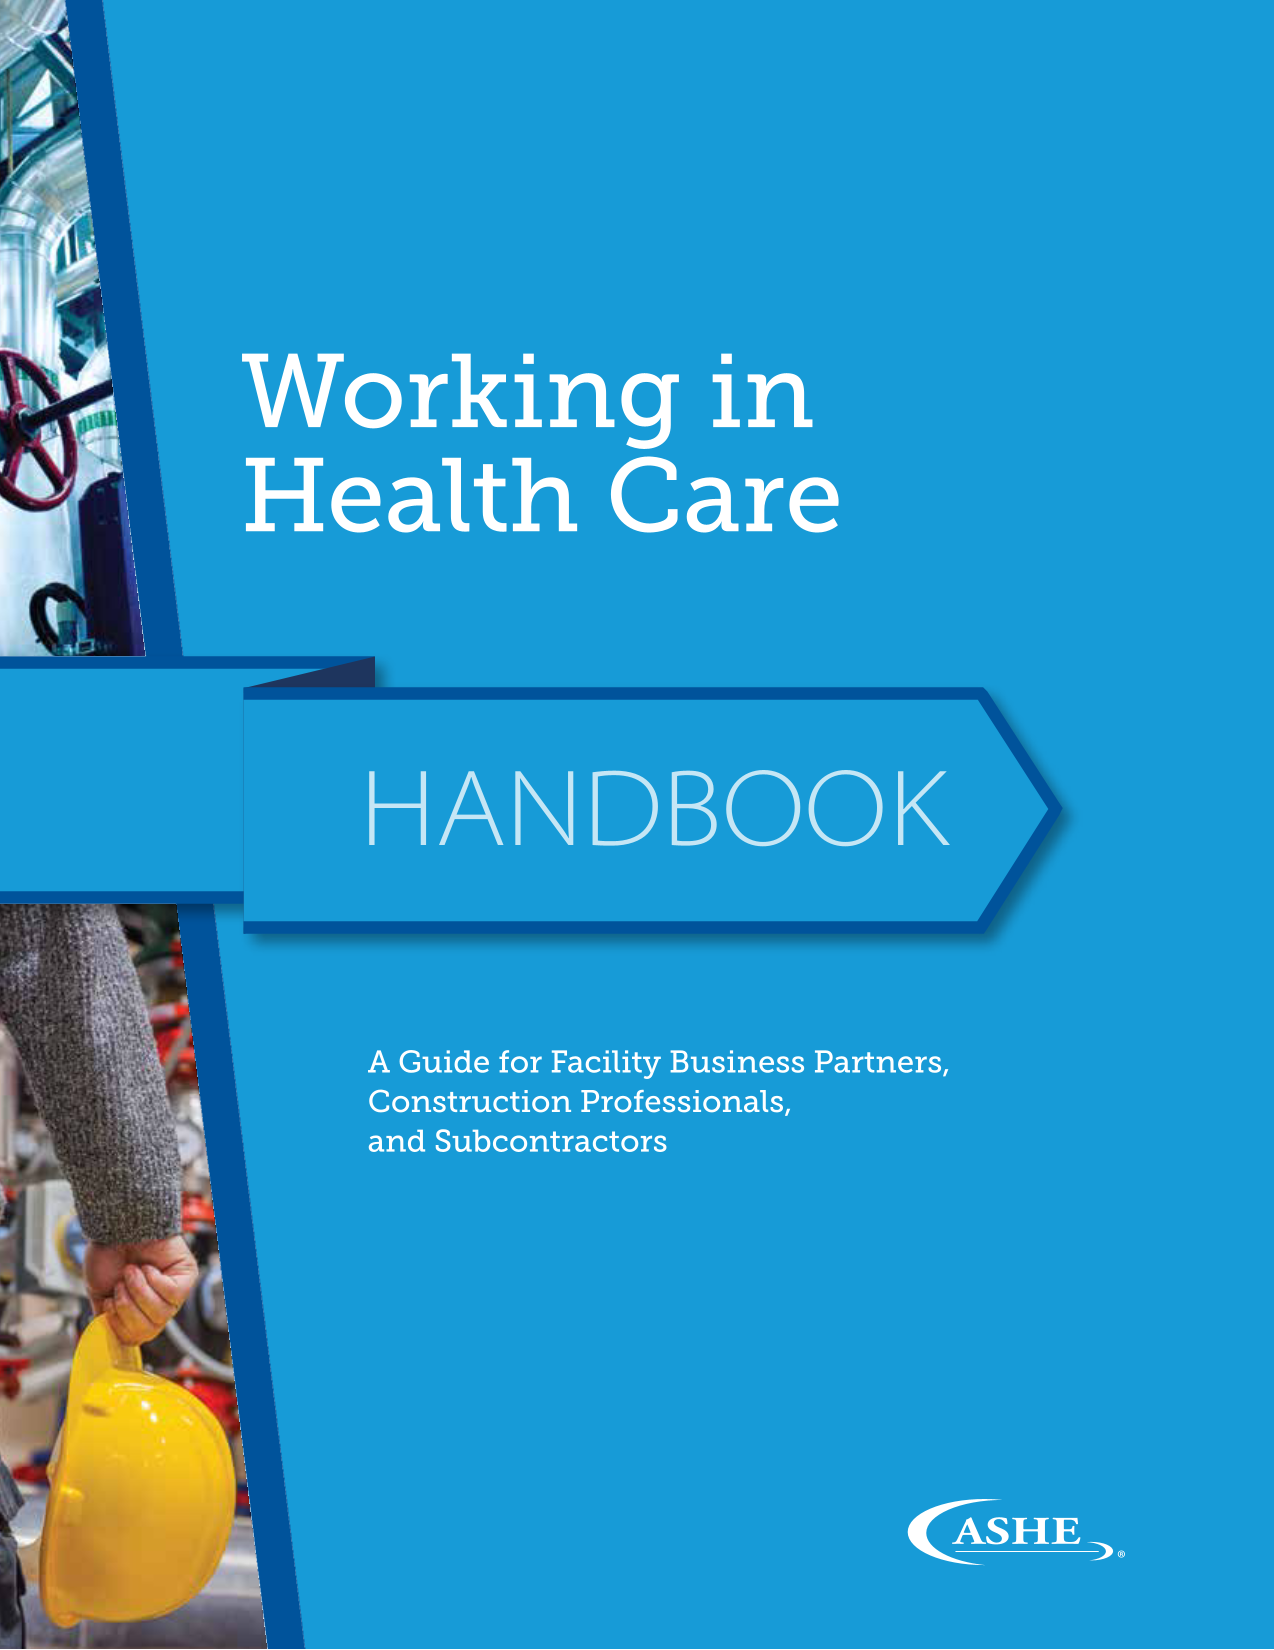 Working in Health Care: A Guide for Facility Business Partners